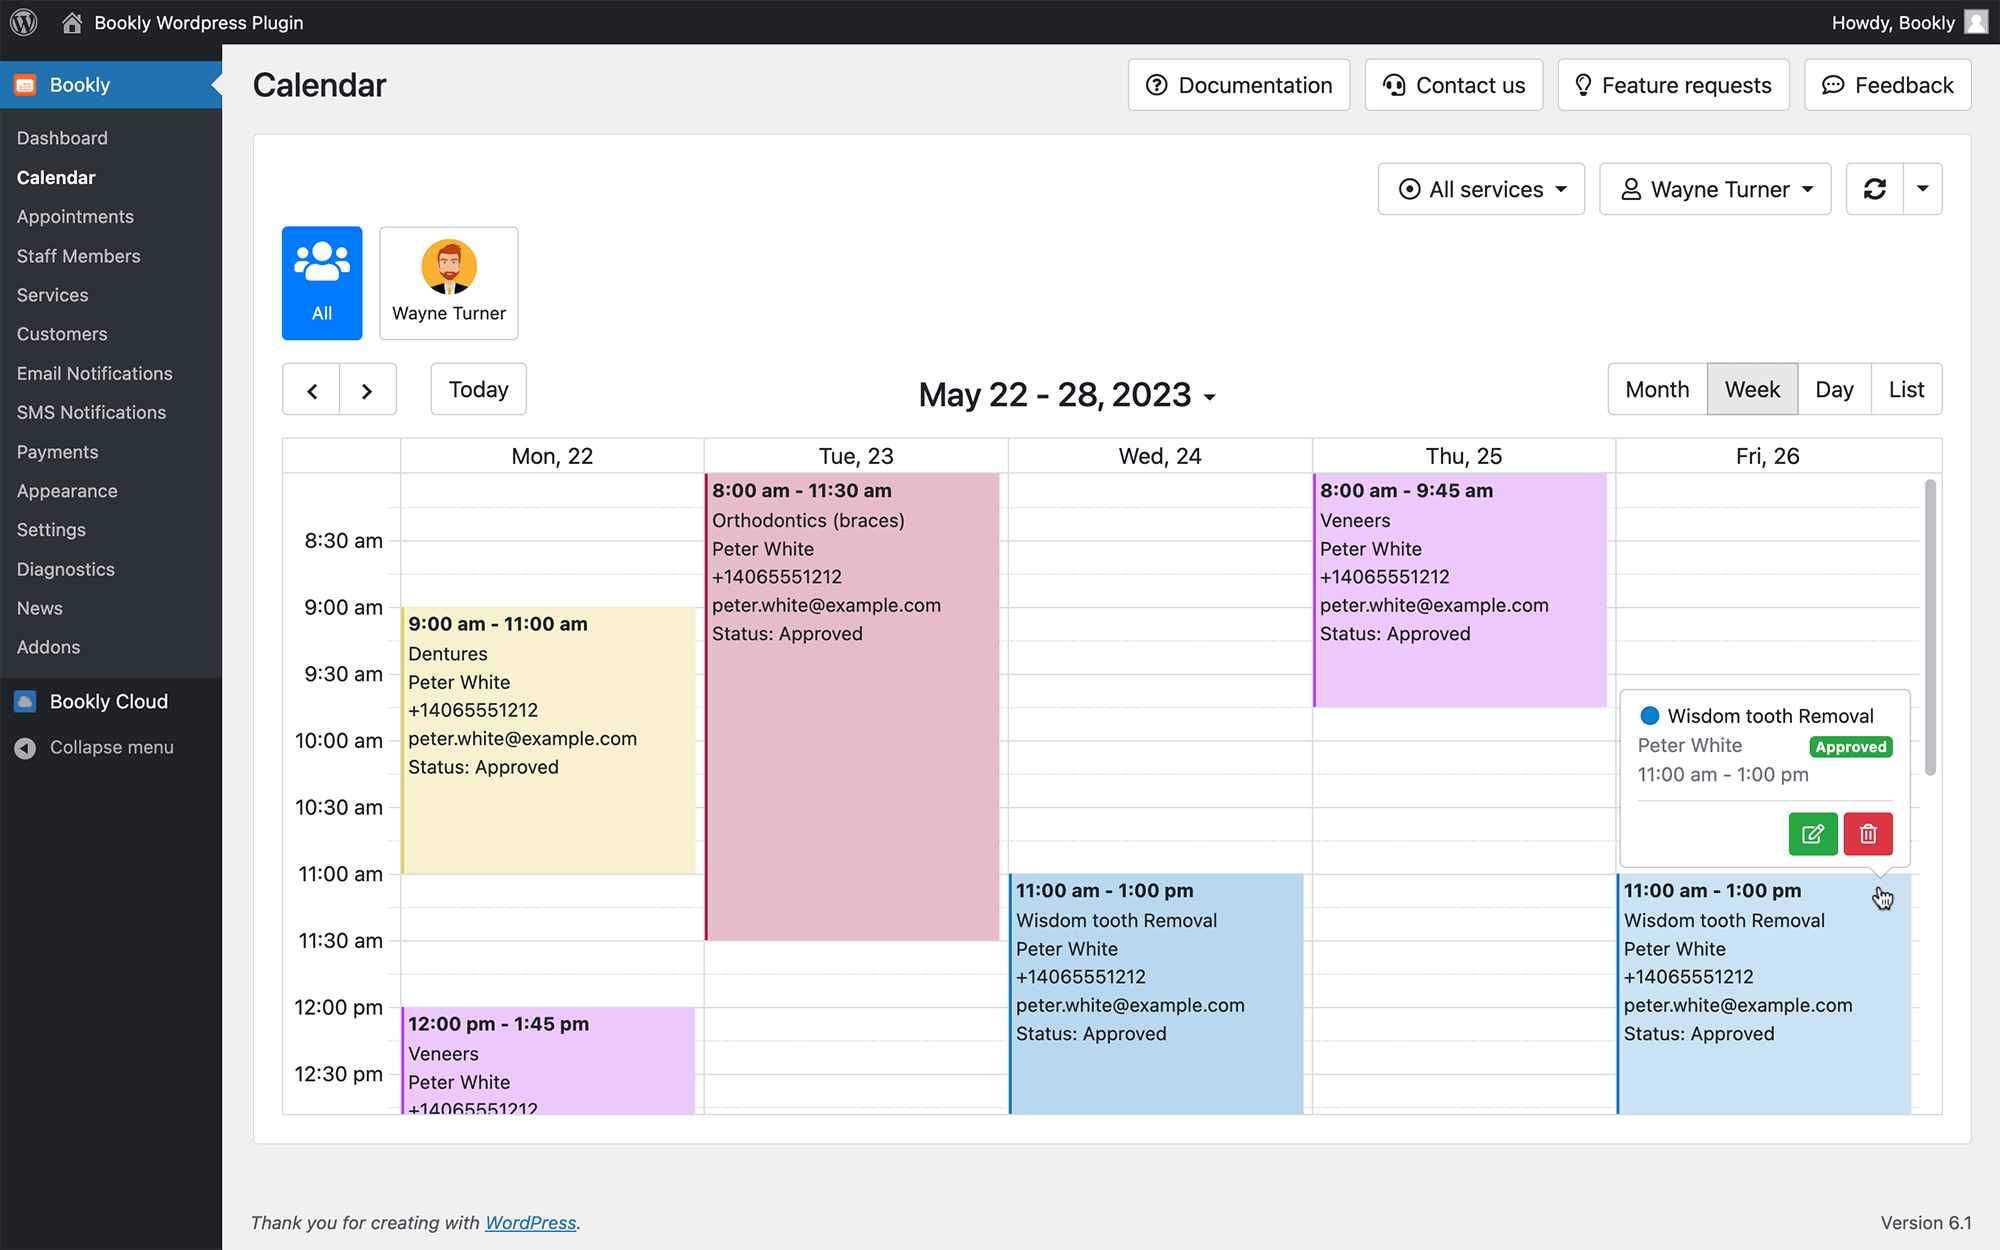 Allow staff members to manage their profiles and calendars in Bookly